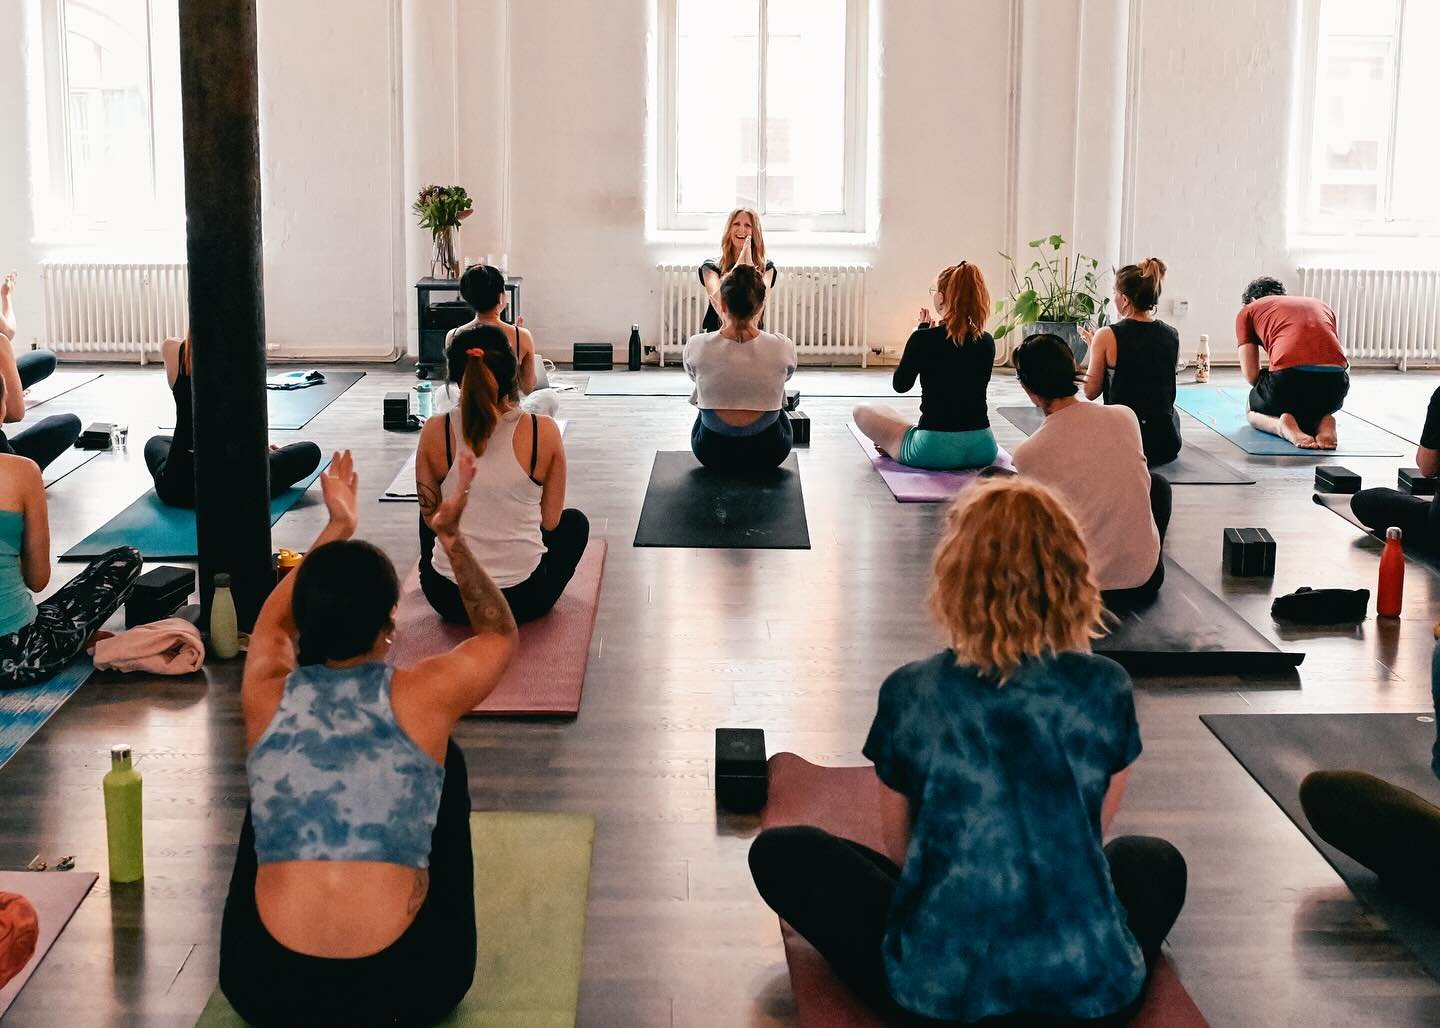 FREE BIRTHDAY CLASS 🙏

This Friday is our 2nd Birthday &mdash; how time has flown by! To celebrate, we will be holding a FREE Vinyasa Flow practice at 5:30pm with Eleanor, just like we did for our very first class in 2022 (see our photos above!).

T